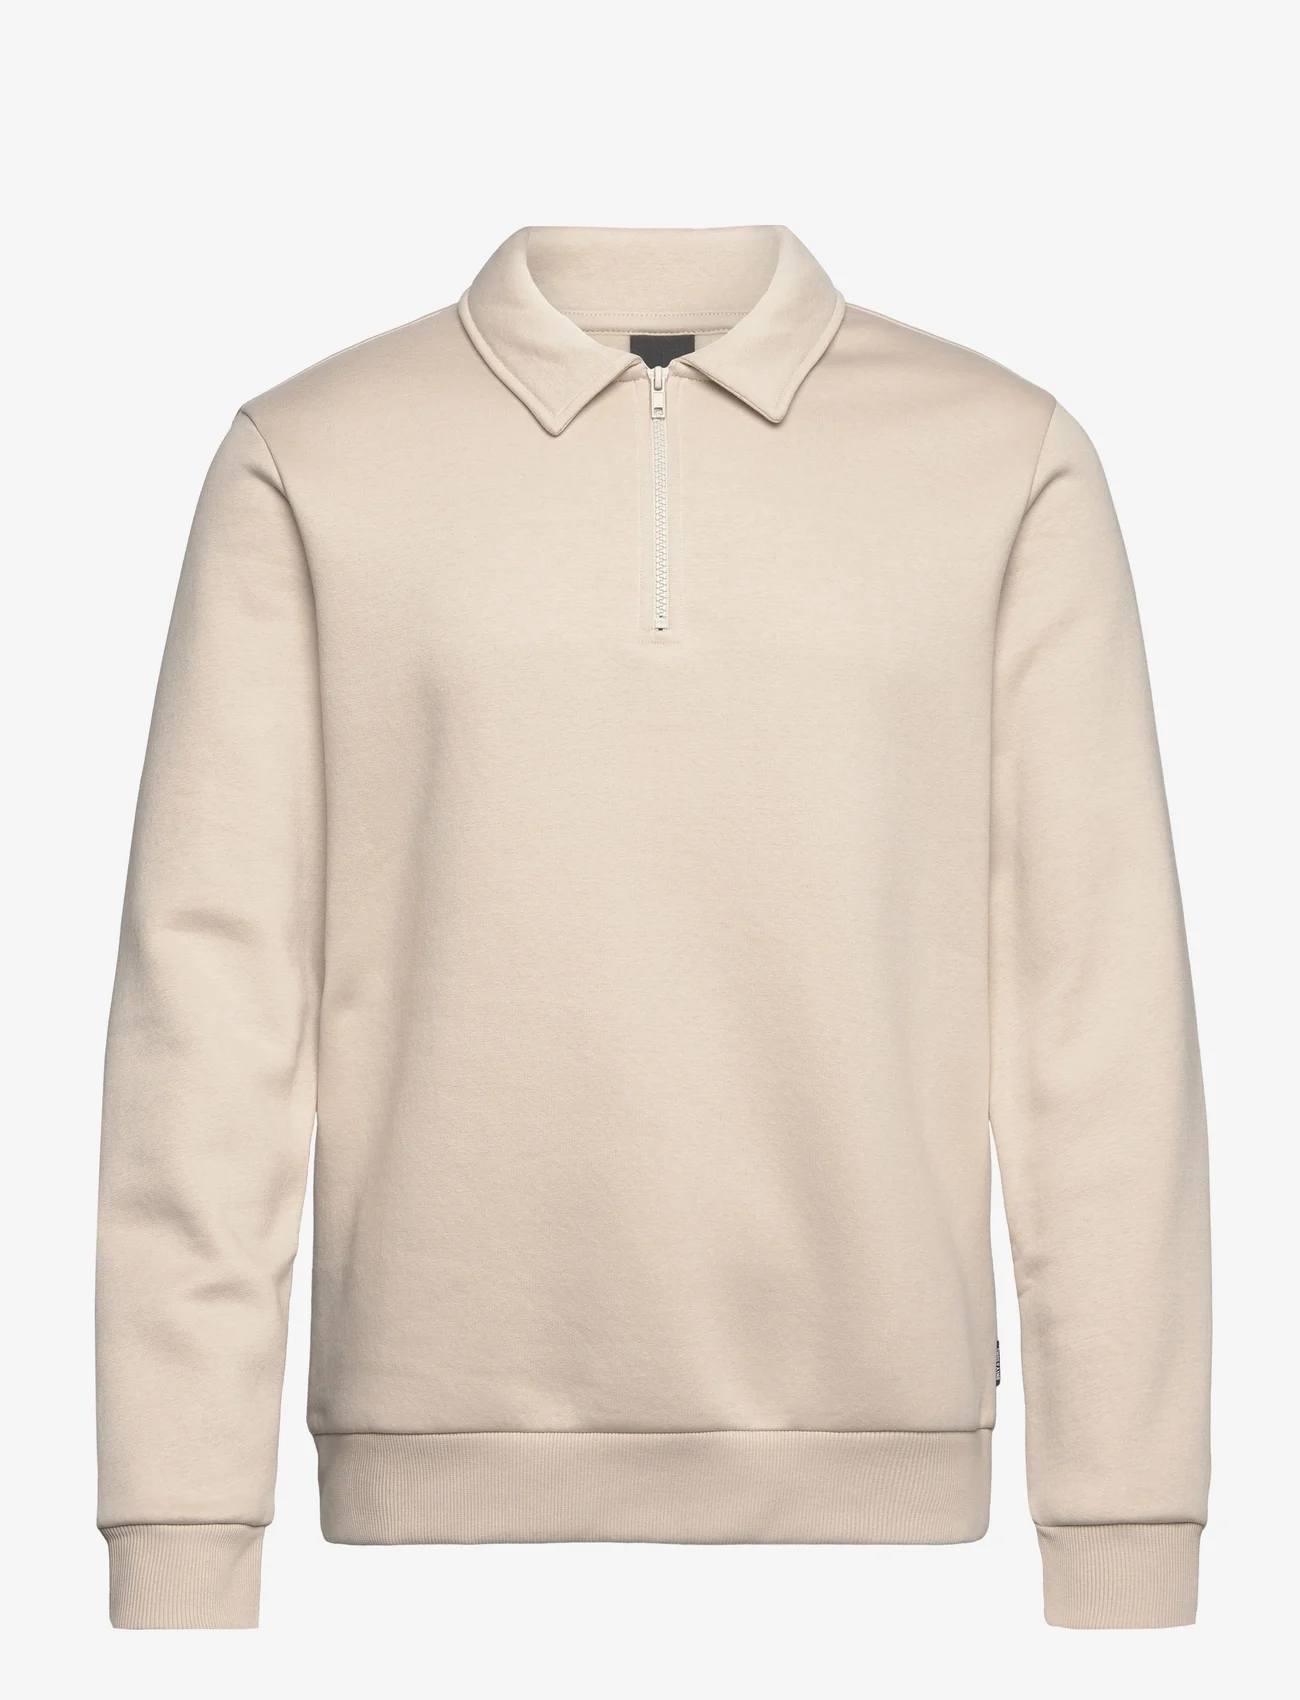 ONLY & SONS - ONSCERES 1/4 ZIP SWEAT POLO - die niedrigsten preise - silver lining - 0